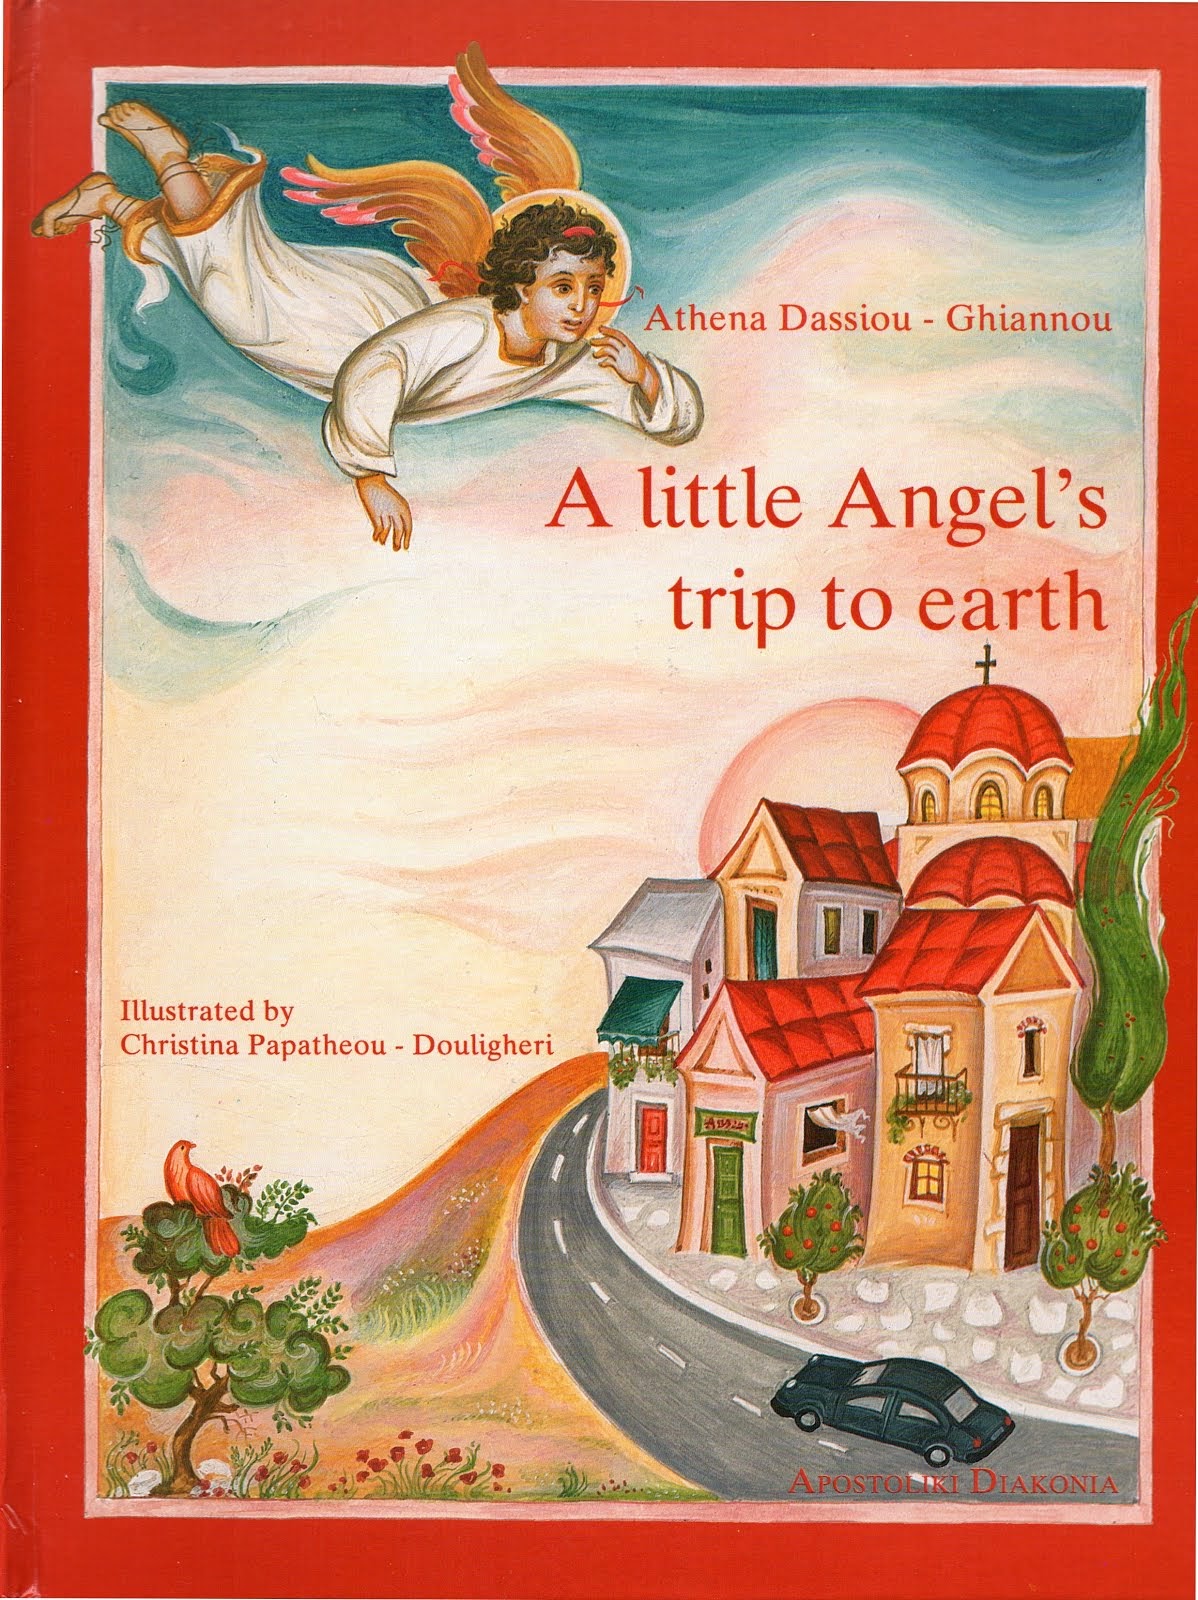 A little angel's trip to earth!